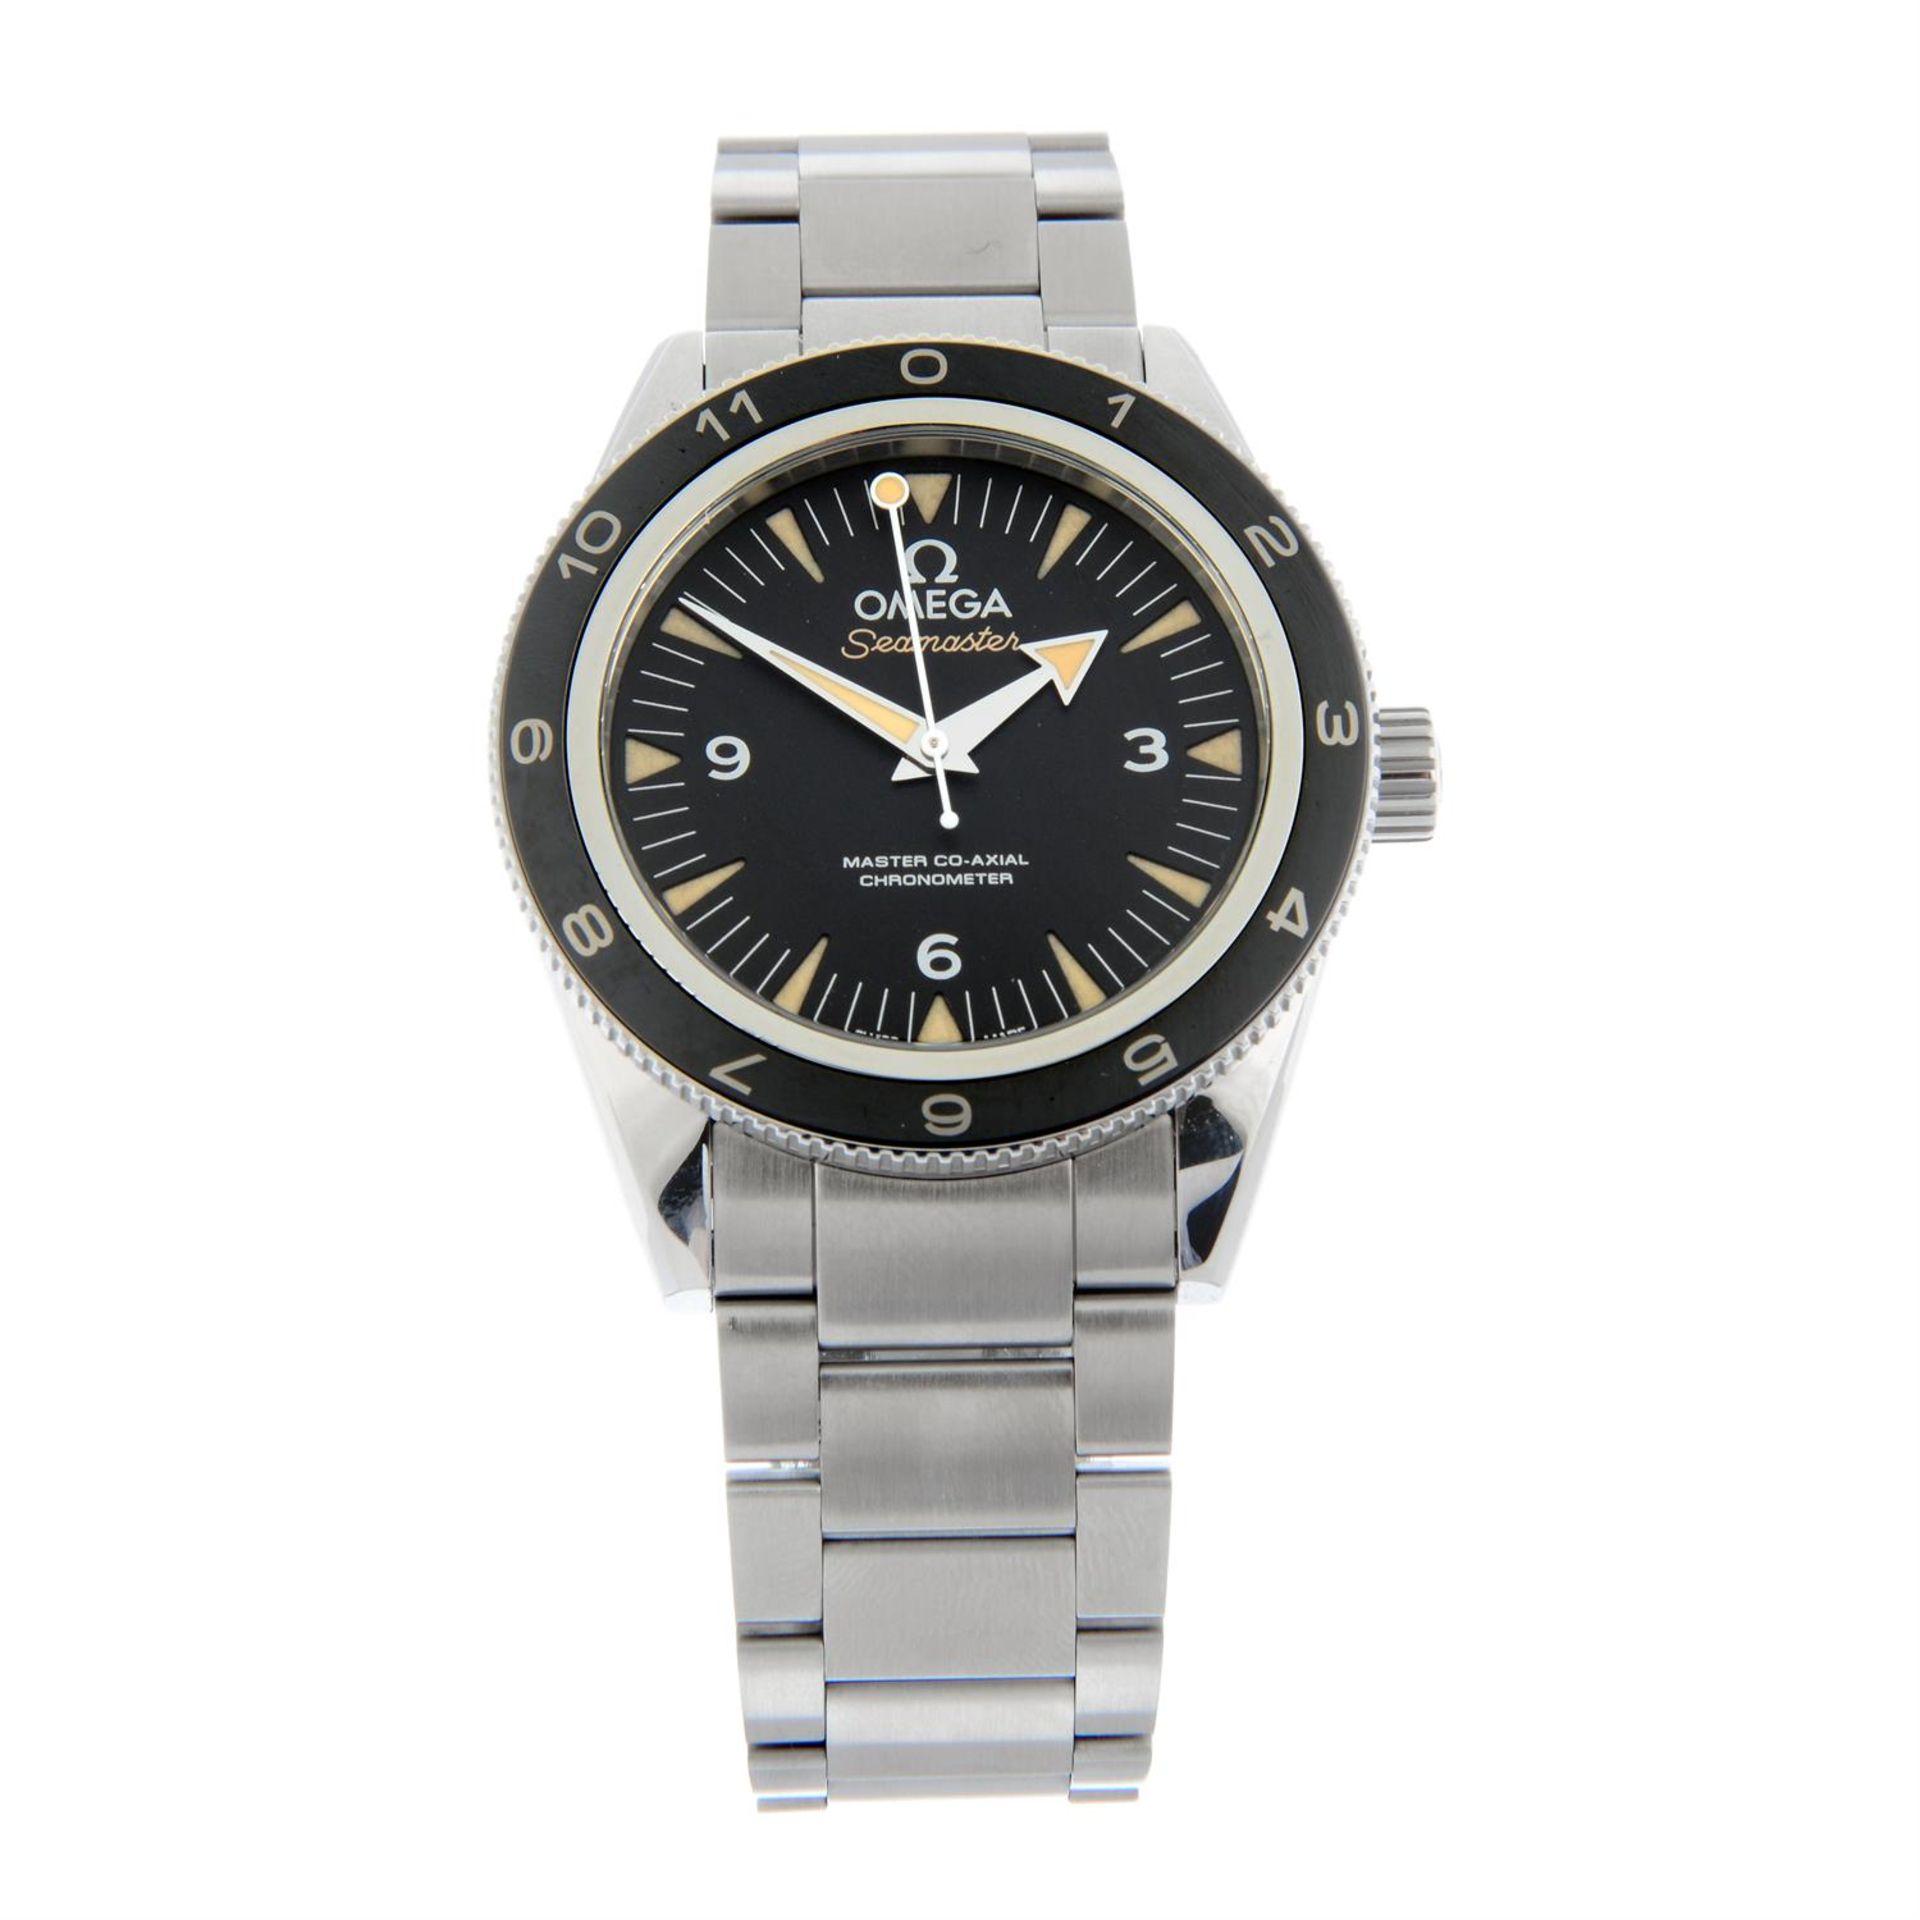 OMEGA - a limited edition stainless steel 'Spectre' Seamaster 300 bracelet watch, 41mm